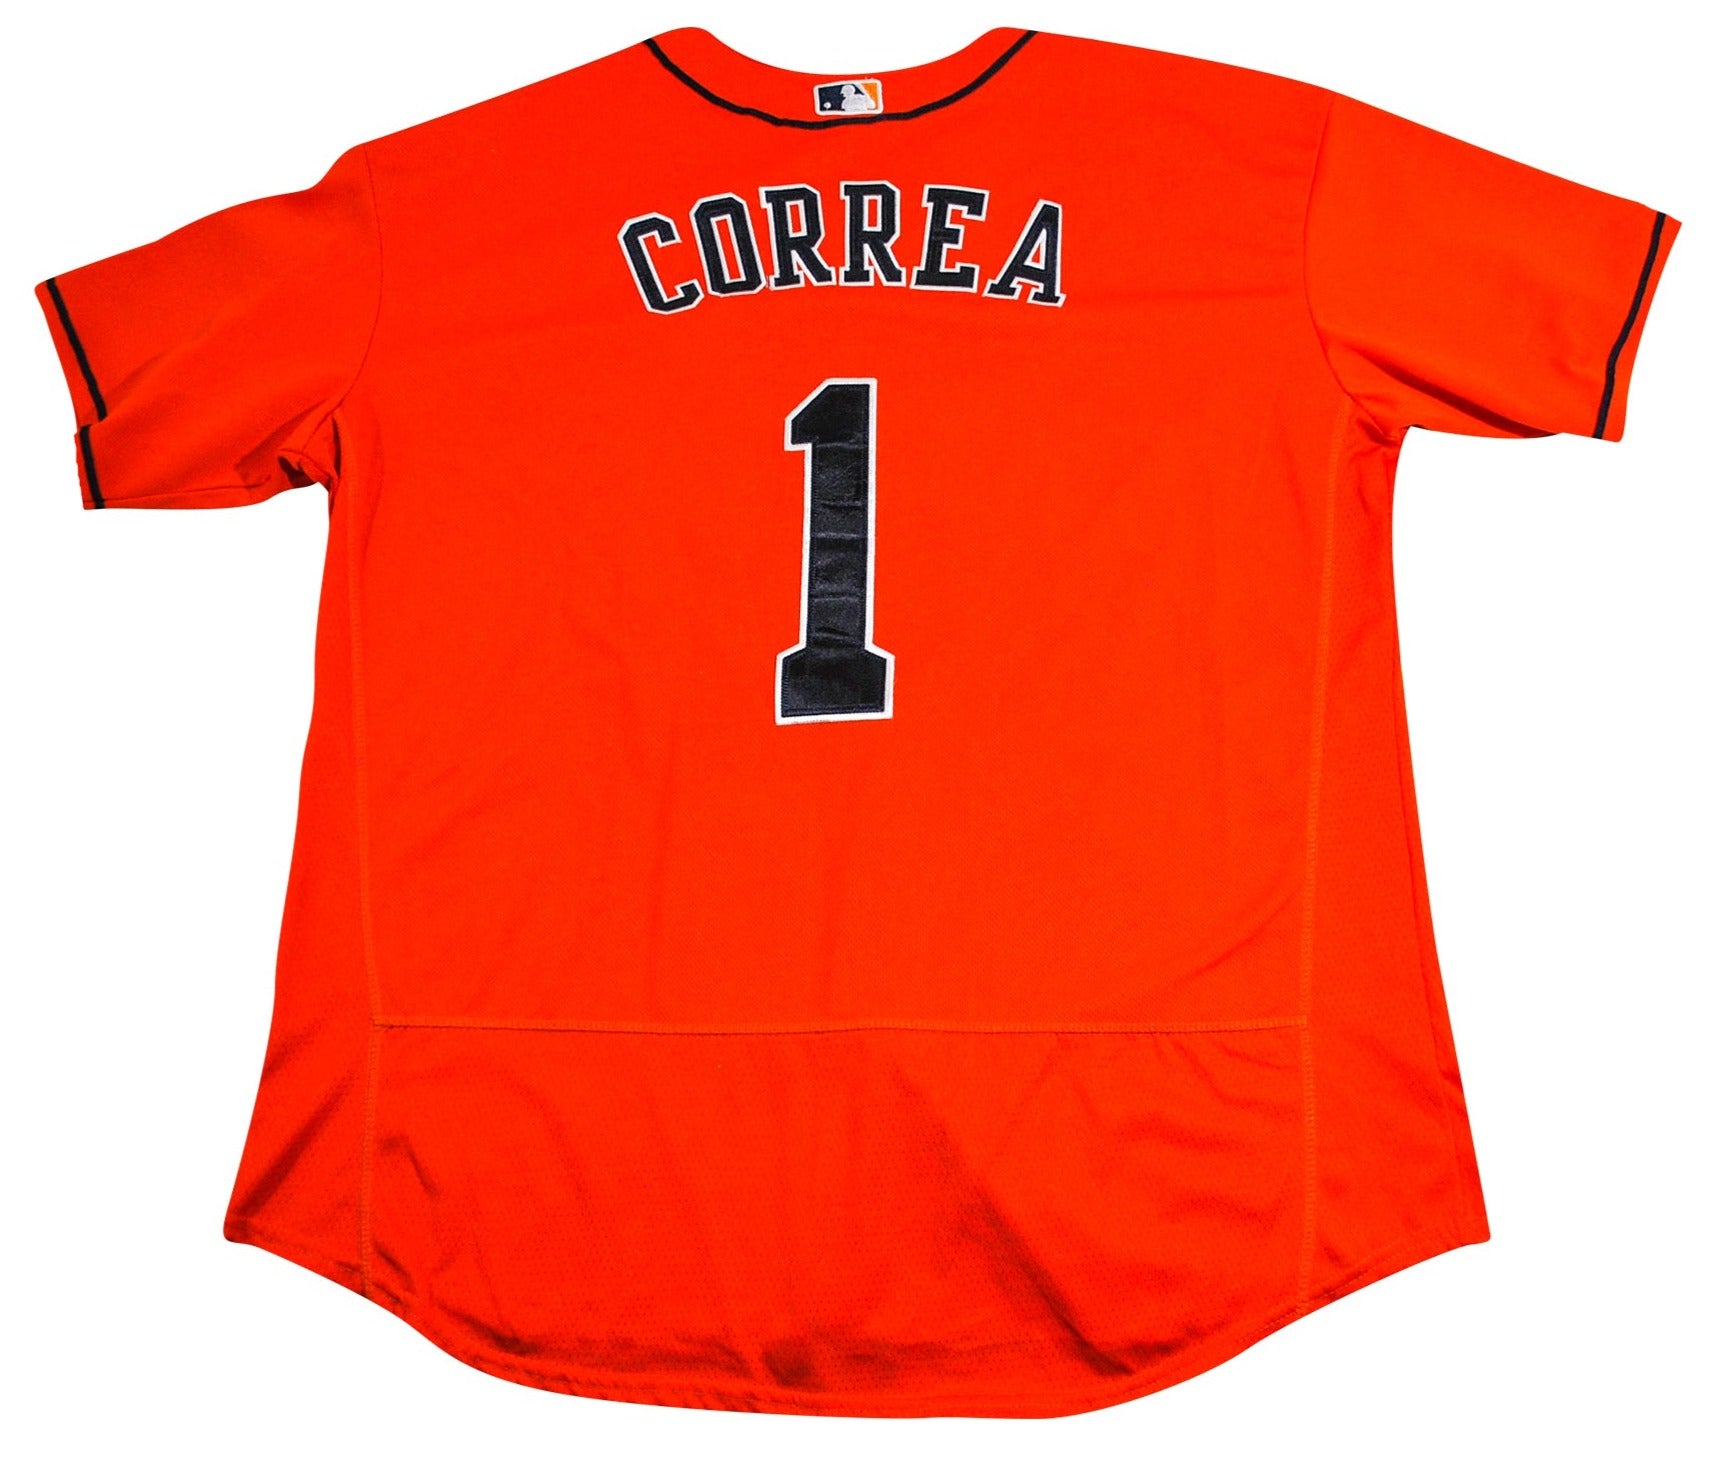 Carlos Correa Astros Player Issued 2019 Players Weekend I am Groot Jersey